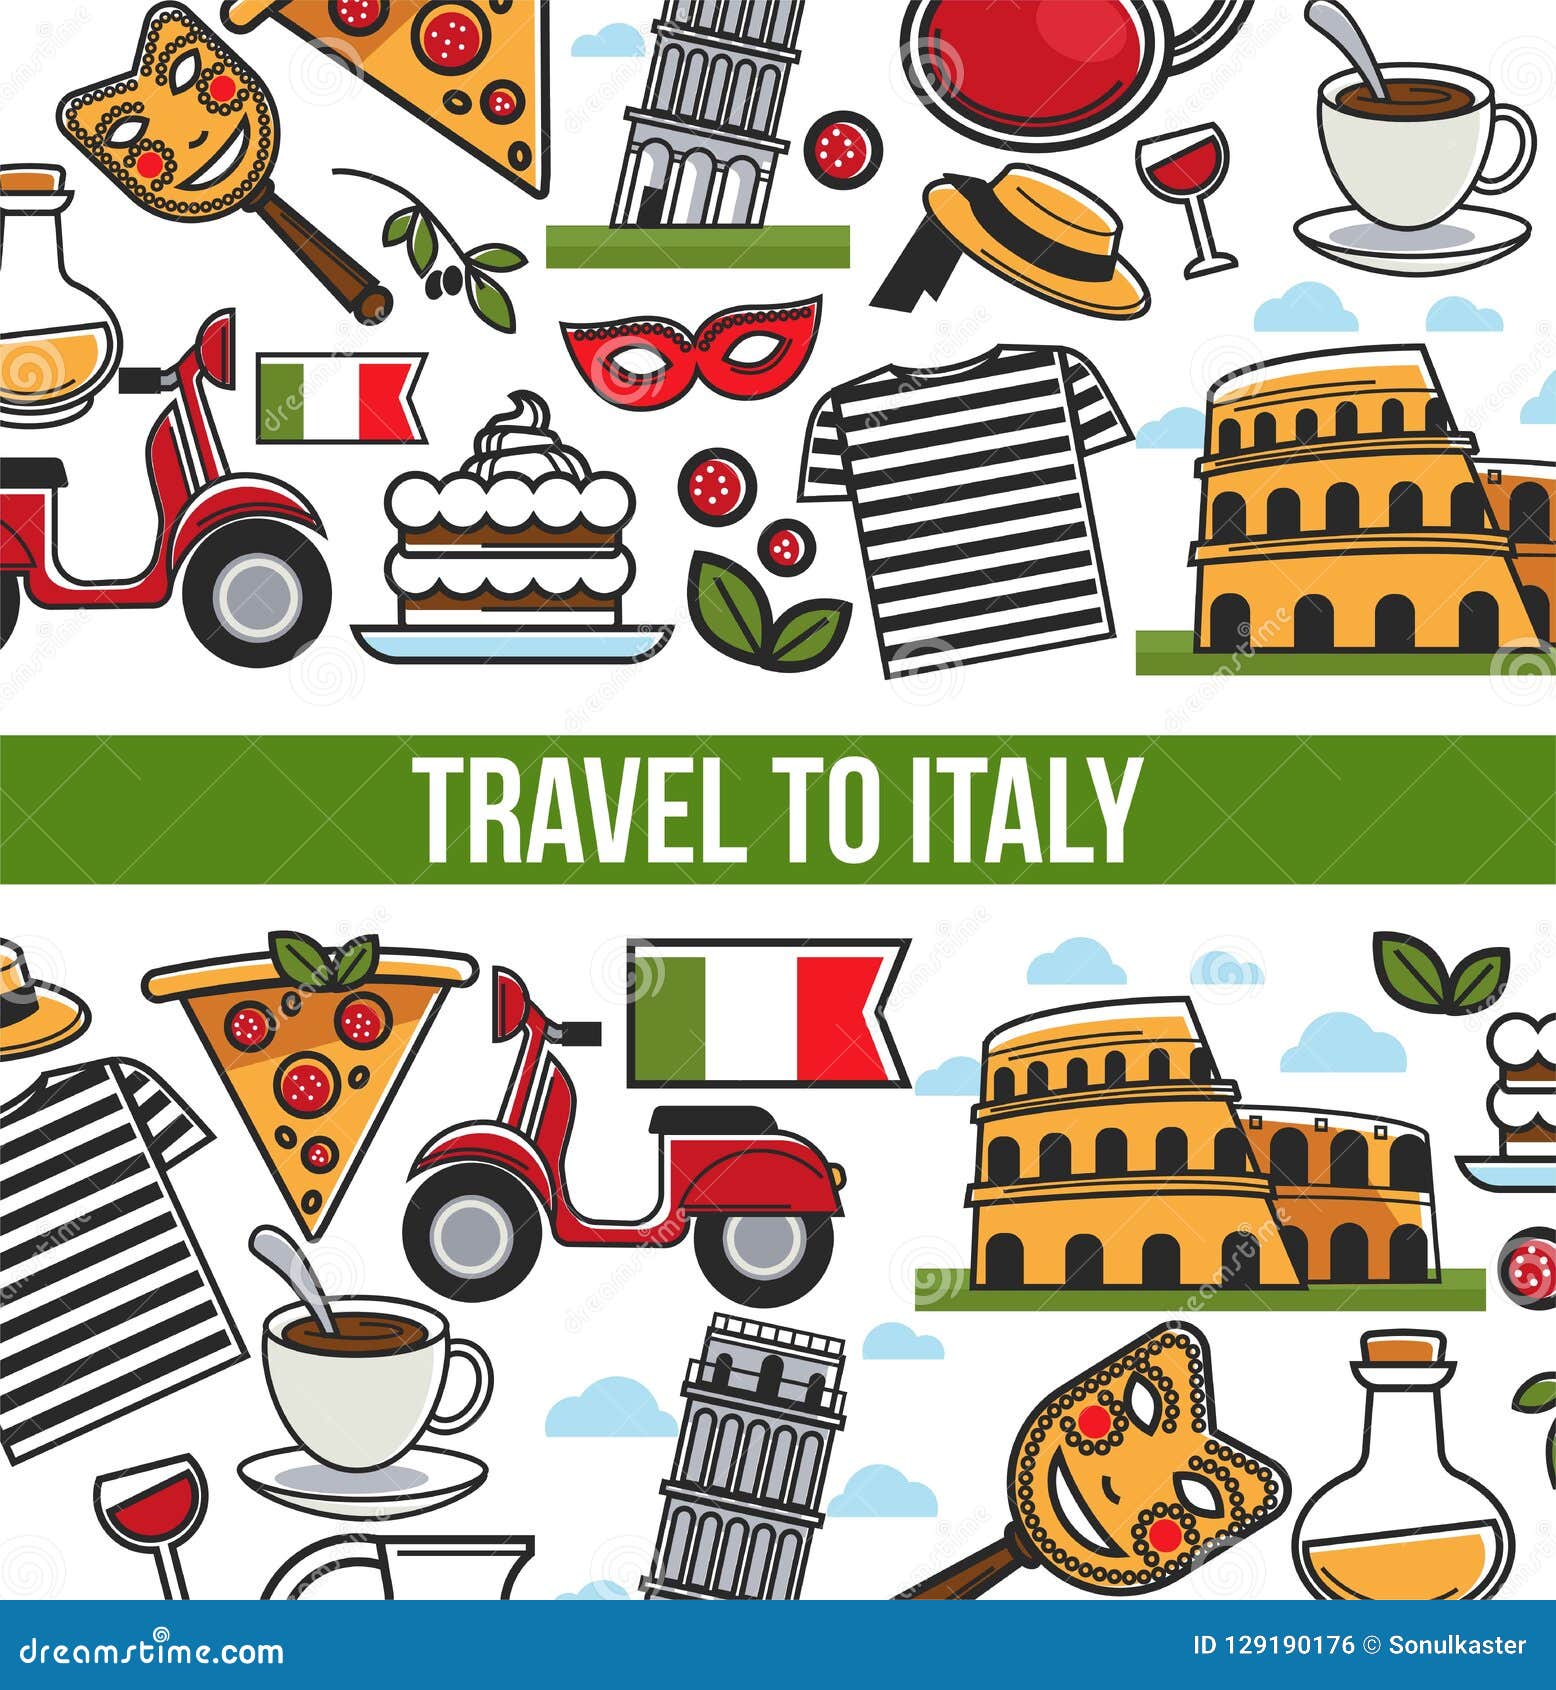 Italian Symbols and Text Sample in Block Poster with Headline. Stock